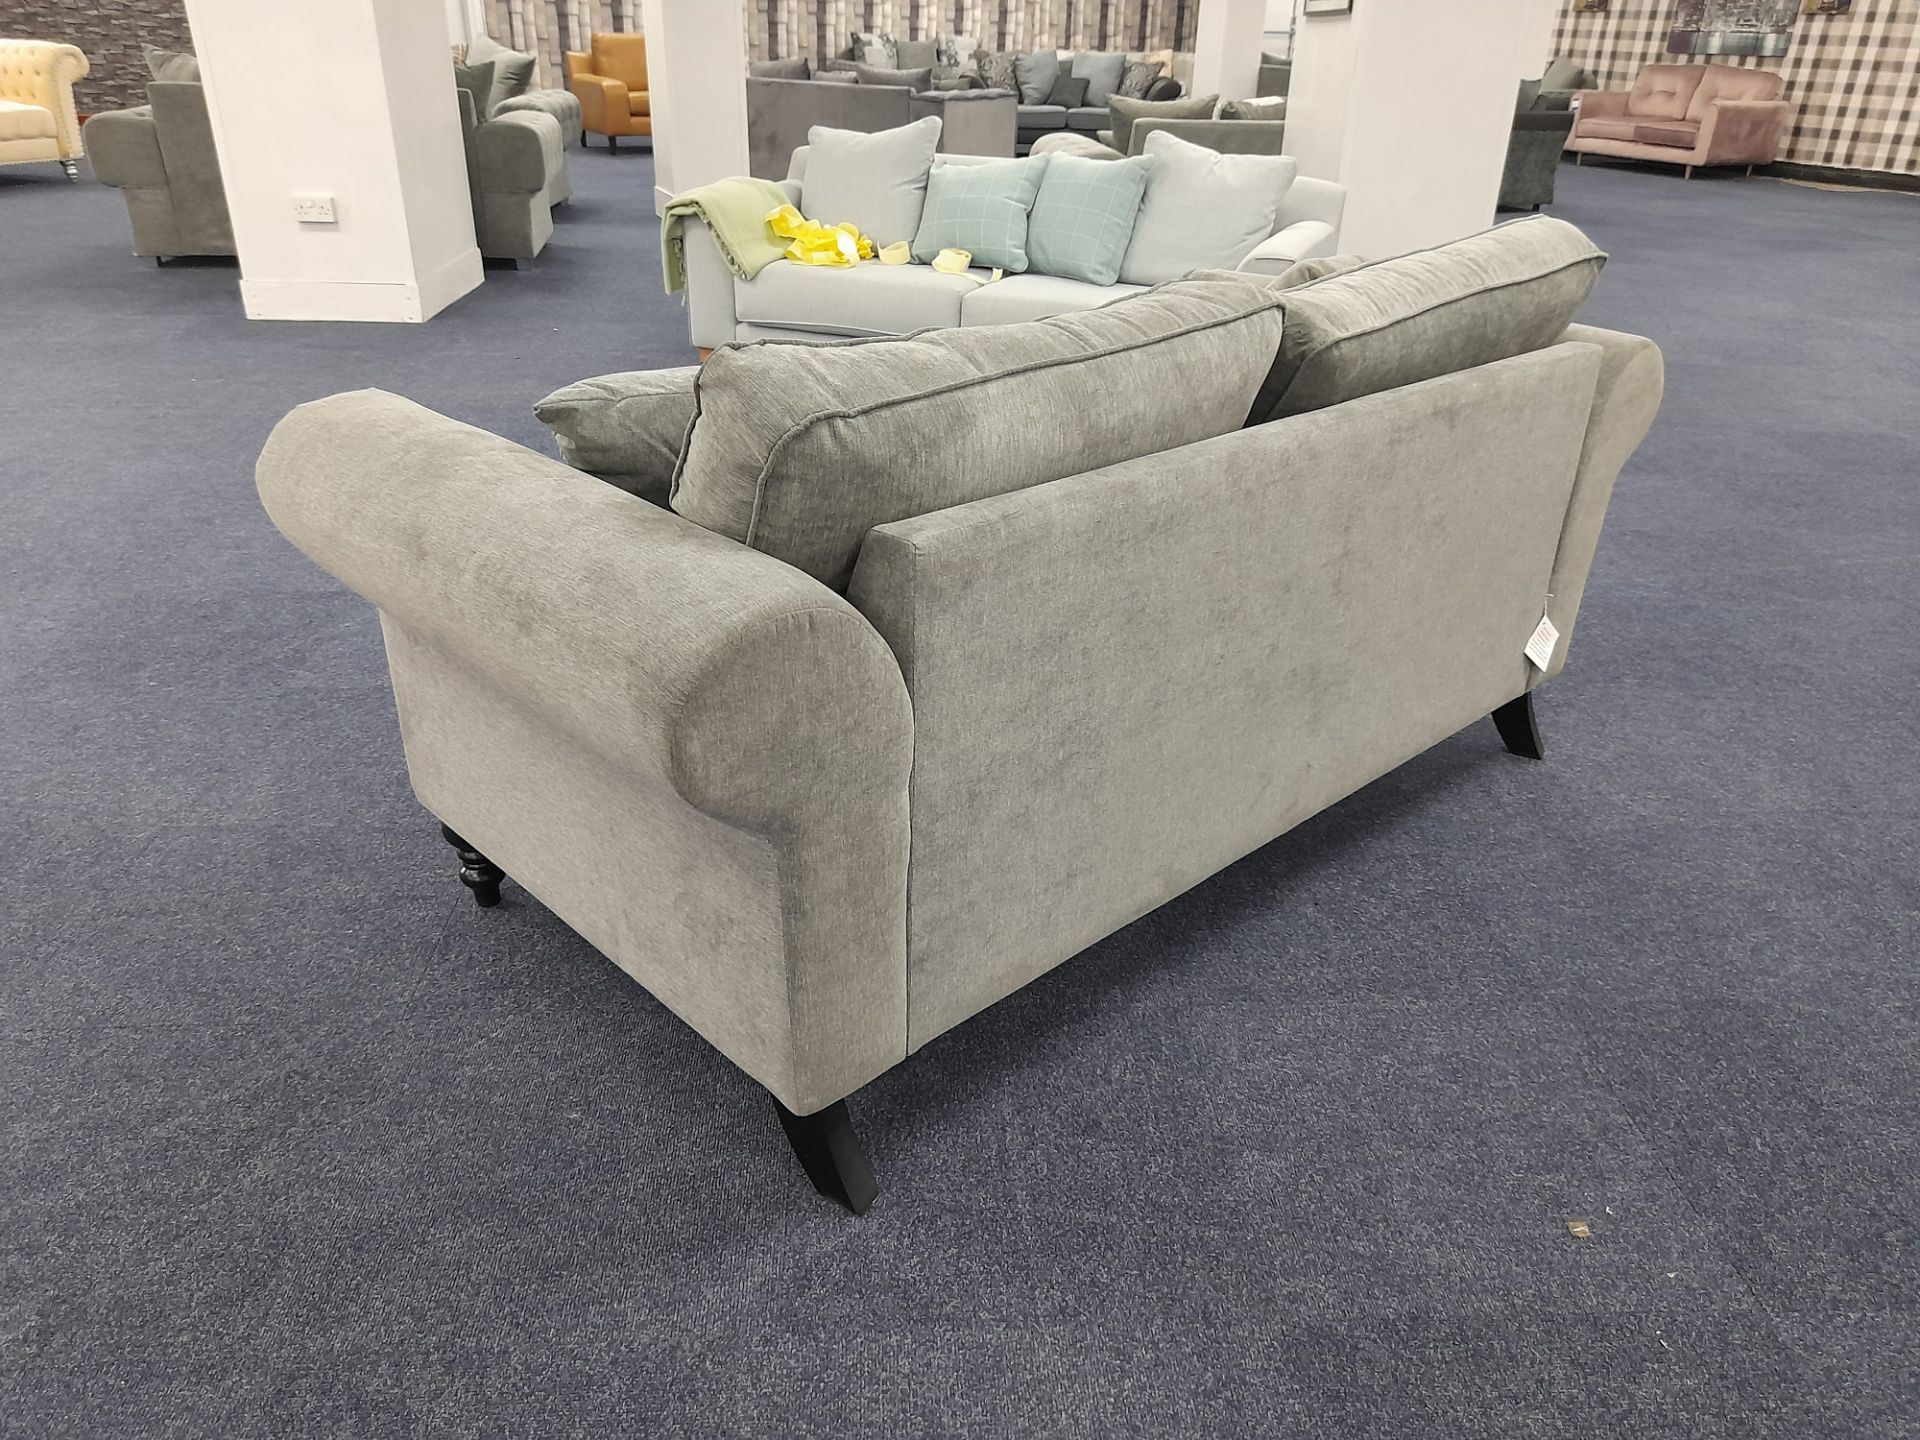 Grey fabric upholstered, 3 seater, standard cushioned back sofa (Ex-Display) - Image 5 of 6